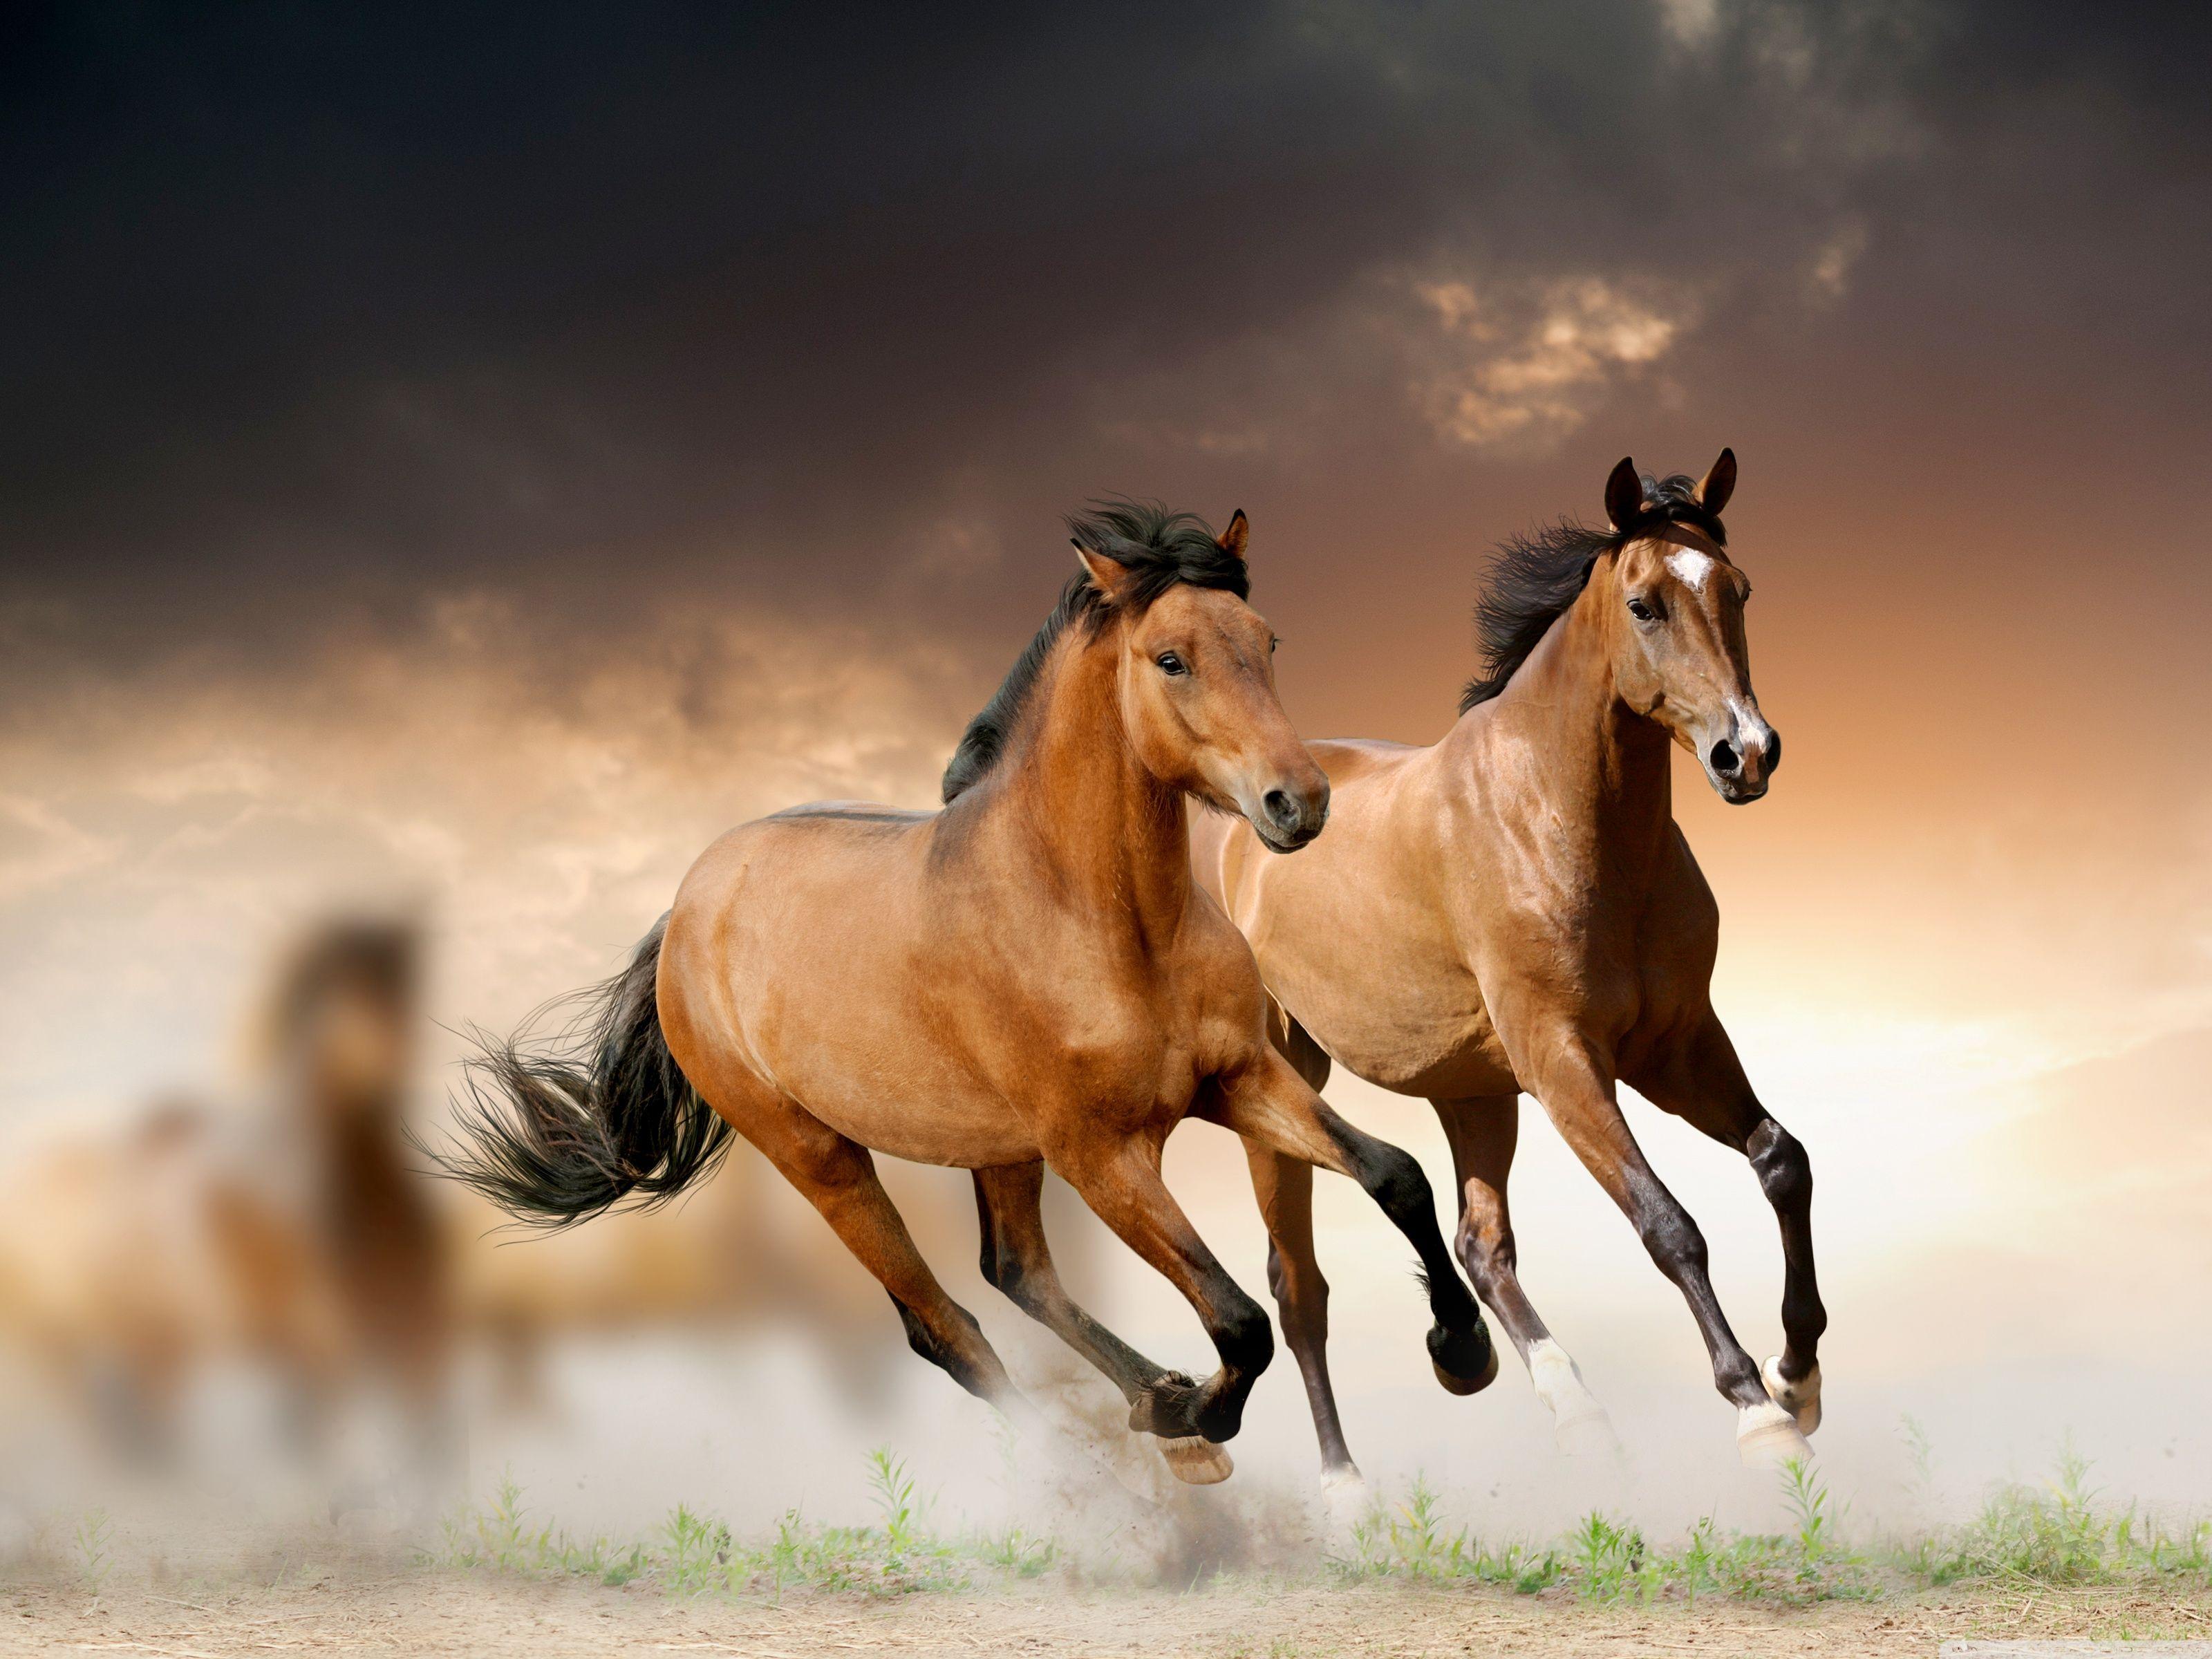 Horse Running Photo  HD Wallpapers